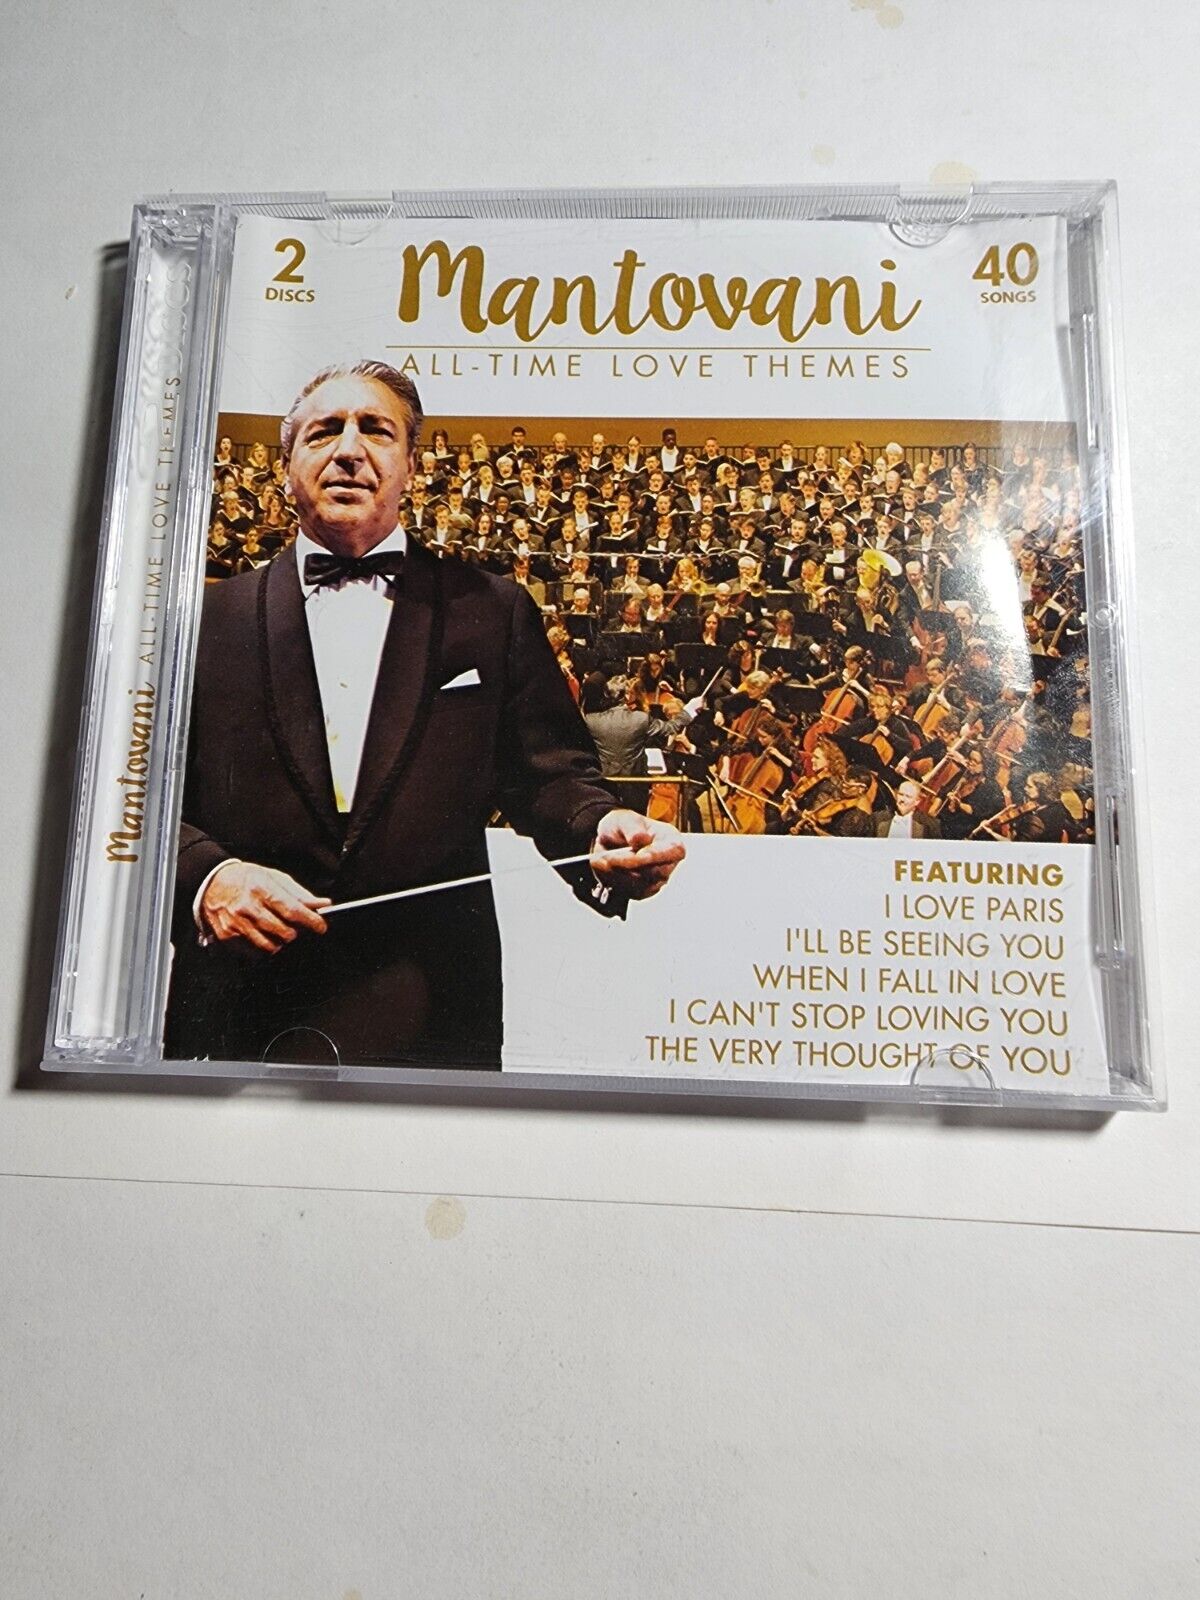 Mantovani All Time Love Themes 2-Disc - 40 Songs VG+ CD44